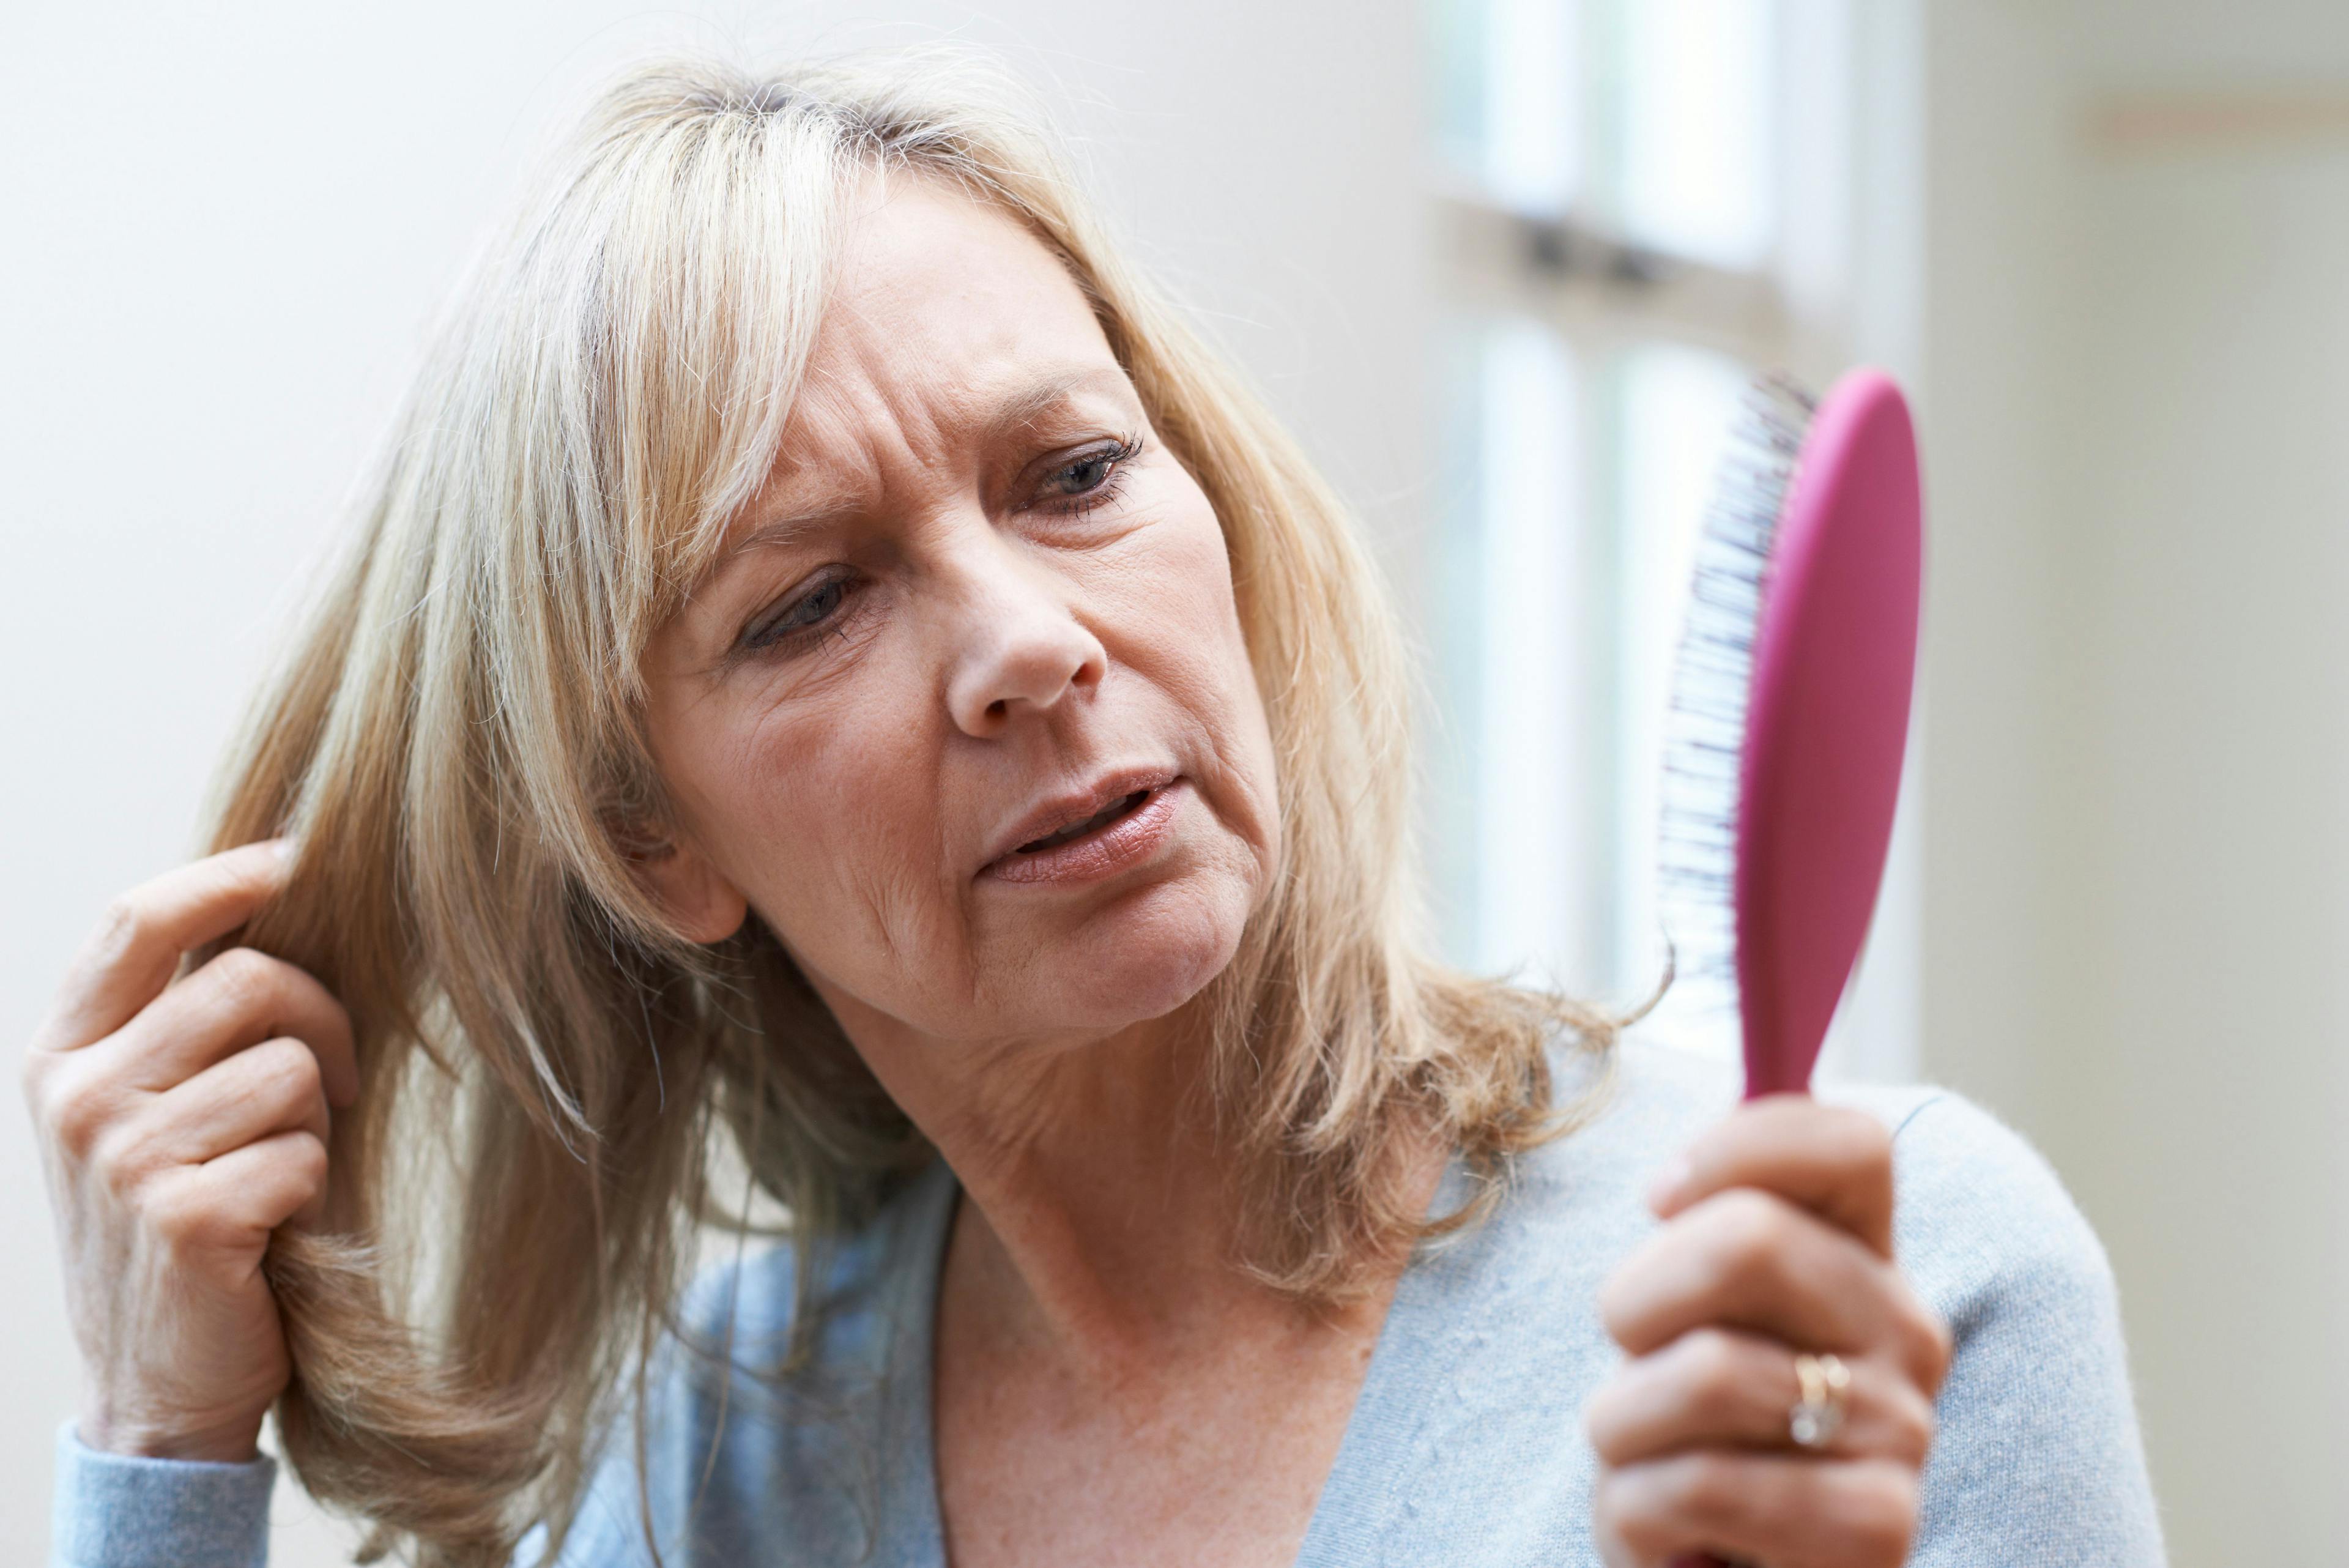 Study shows strong correlation between female pattern hair loss and BMI in postmenopausal women